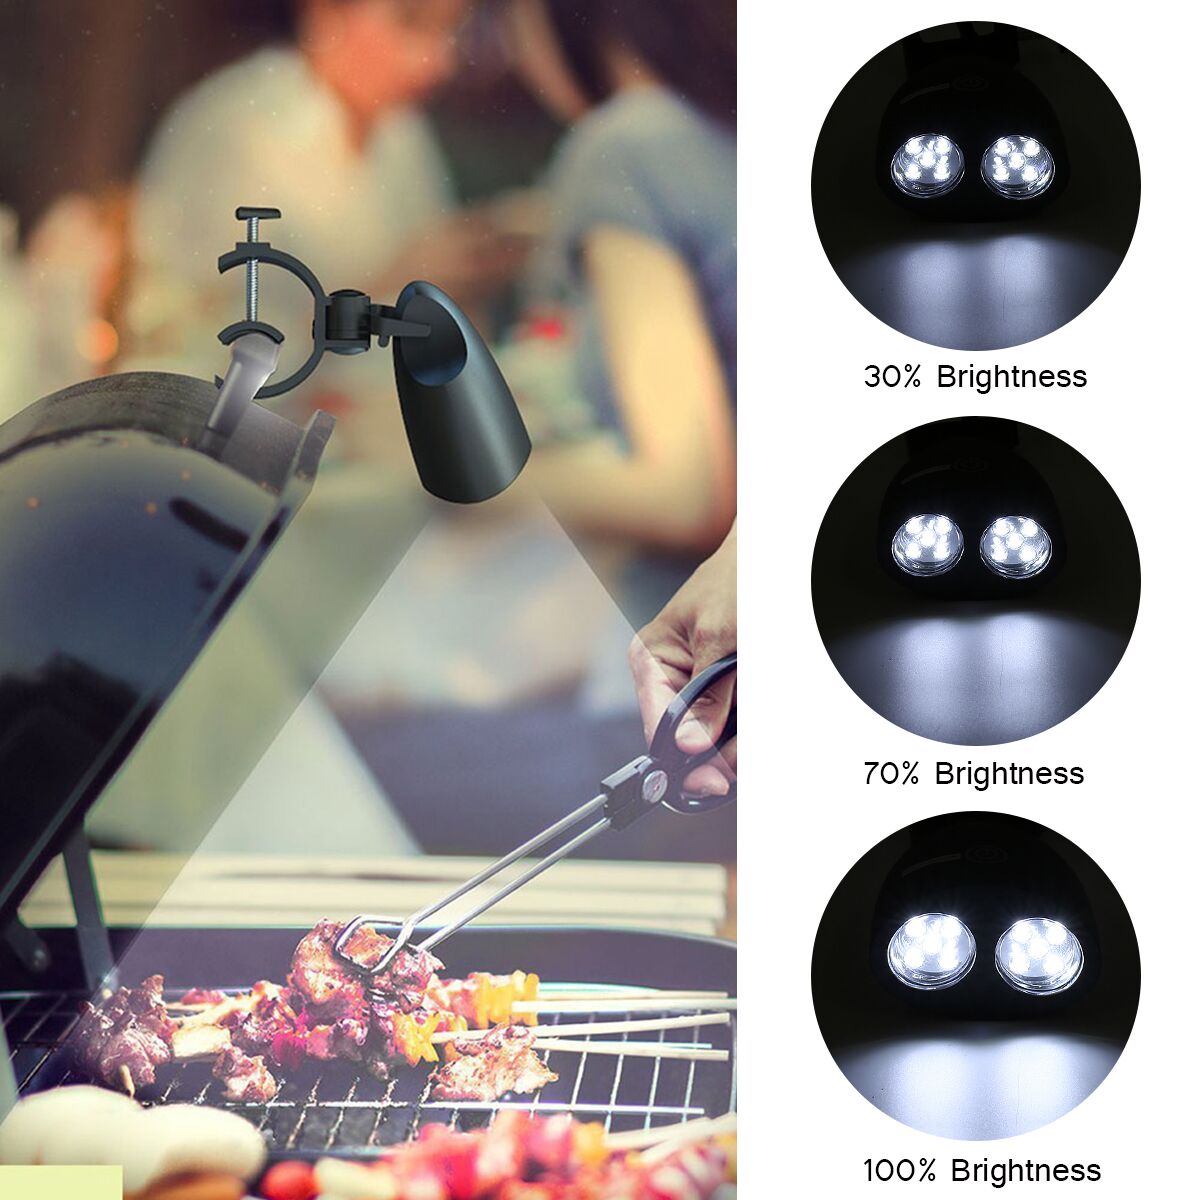 10-LED-BBQ-Grill-Barbecue-Sensor-Light-Outdoor-Waterproof-Handle-Mount-Clip-Camp-Lamp-DC-45V-1257898